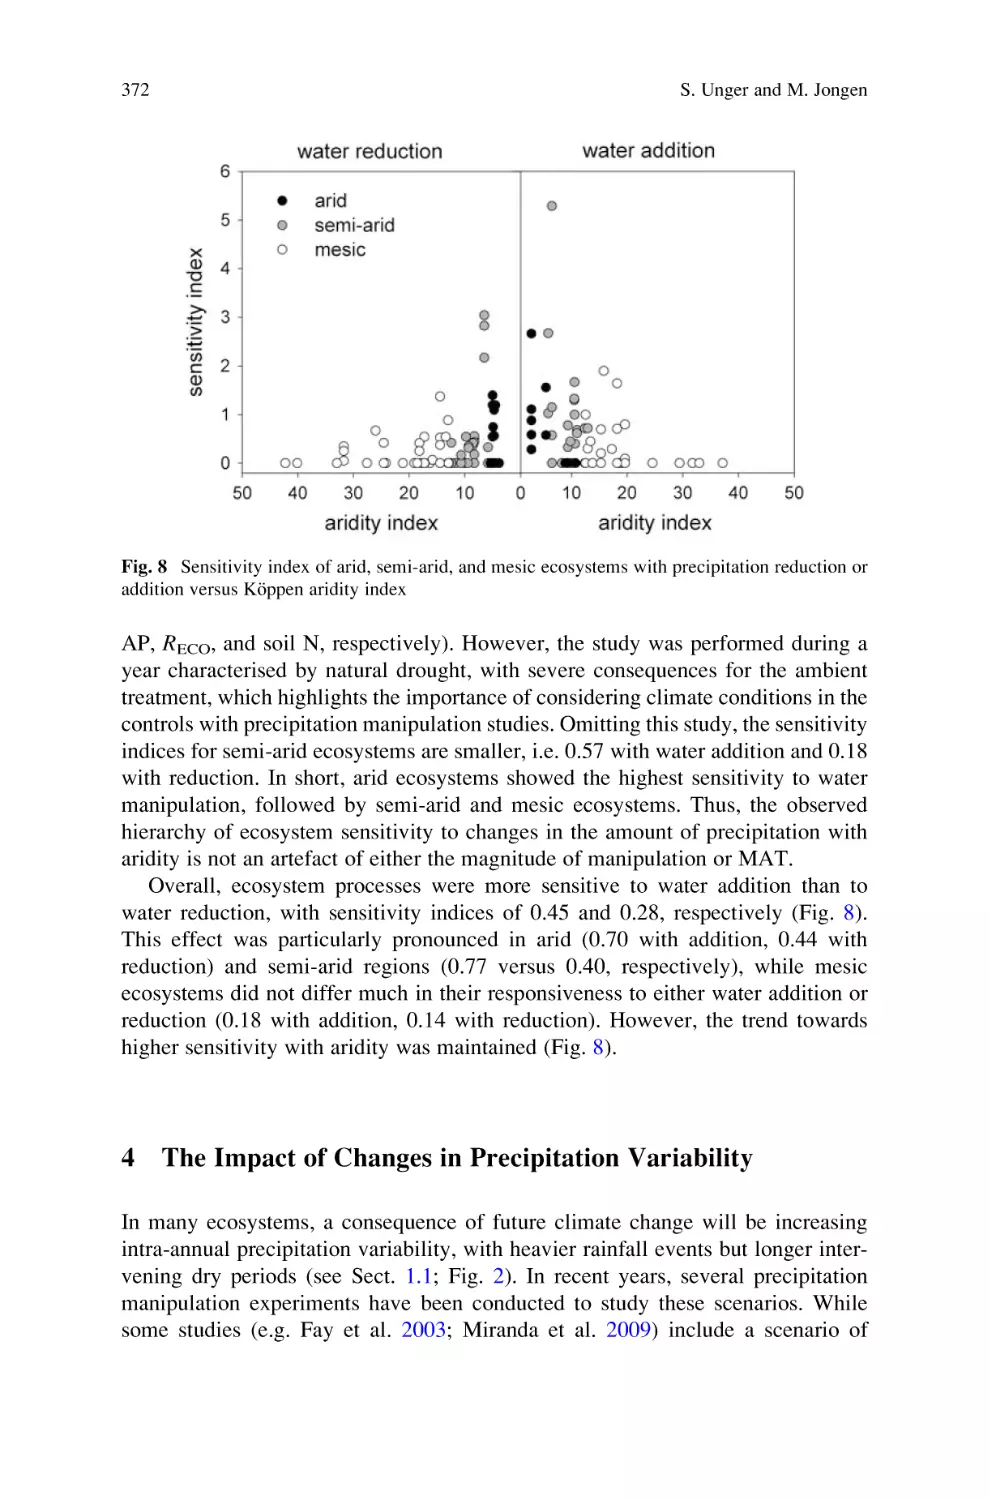 4 The Impact of Changes in Precipitation Variability